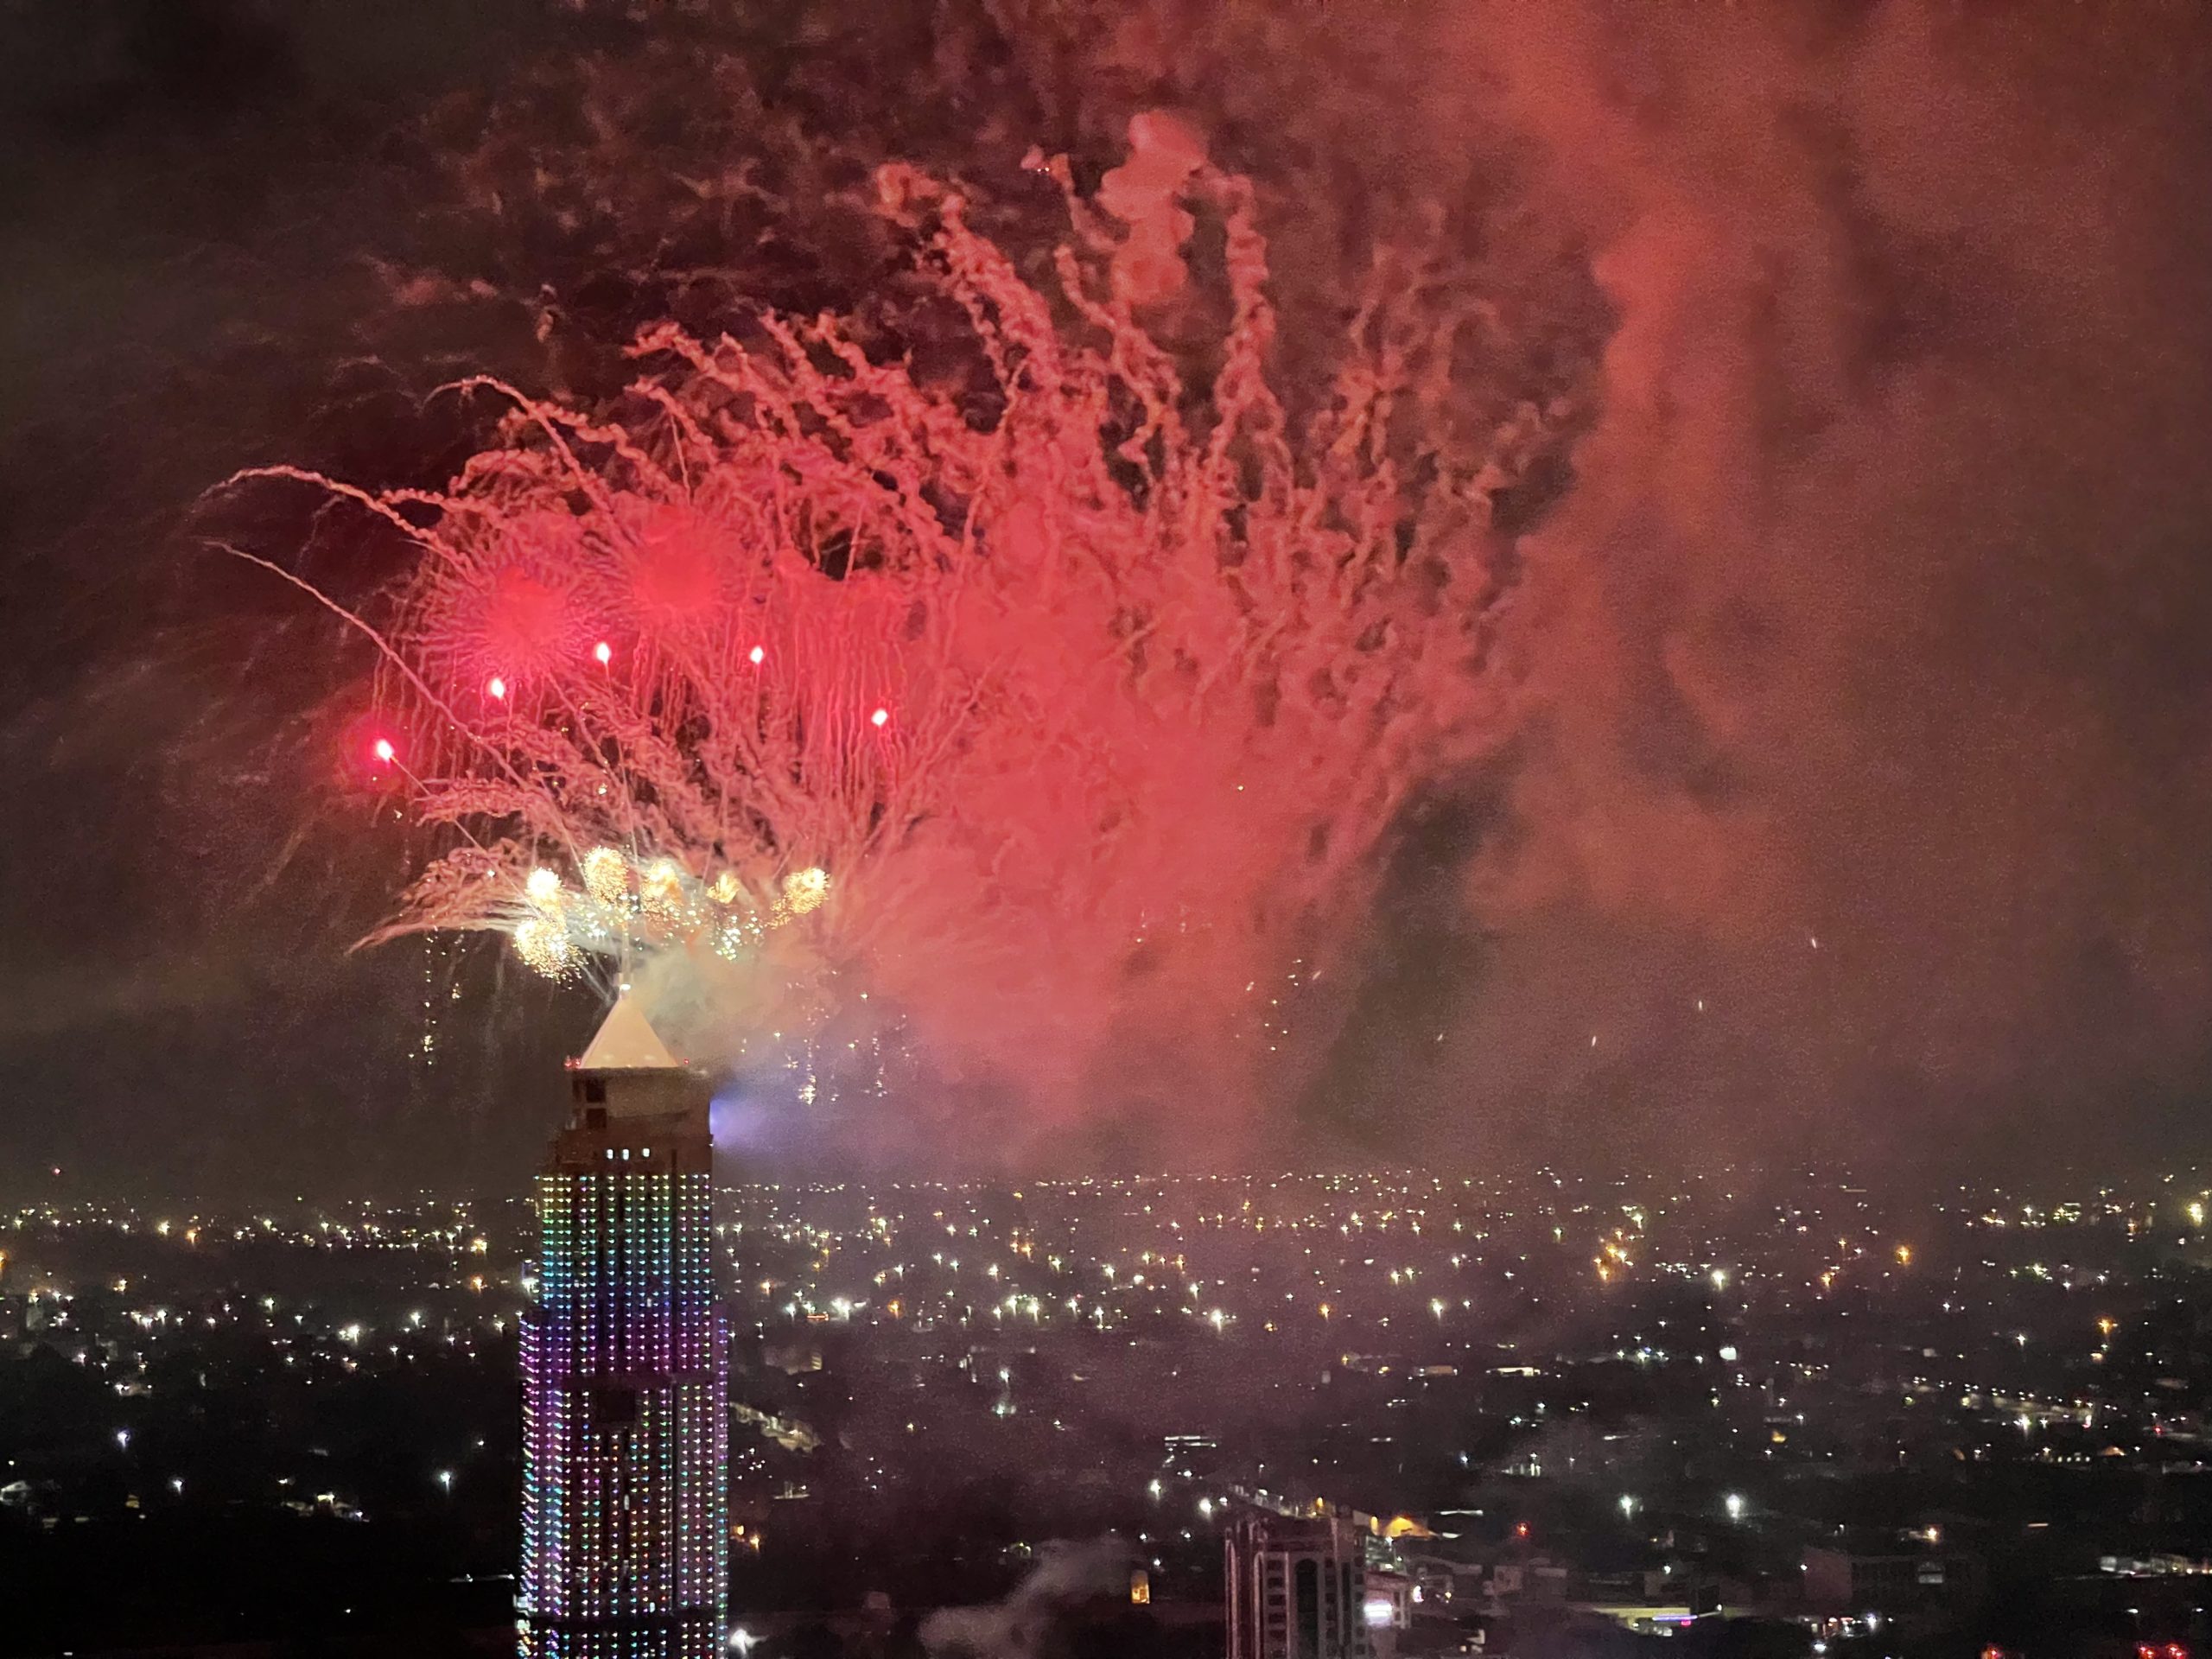 The year 2022 is ushered in with fireworks stop the Acropolis in Athens